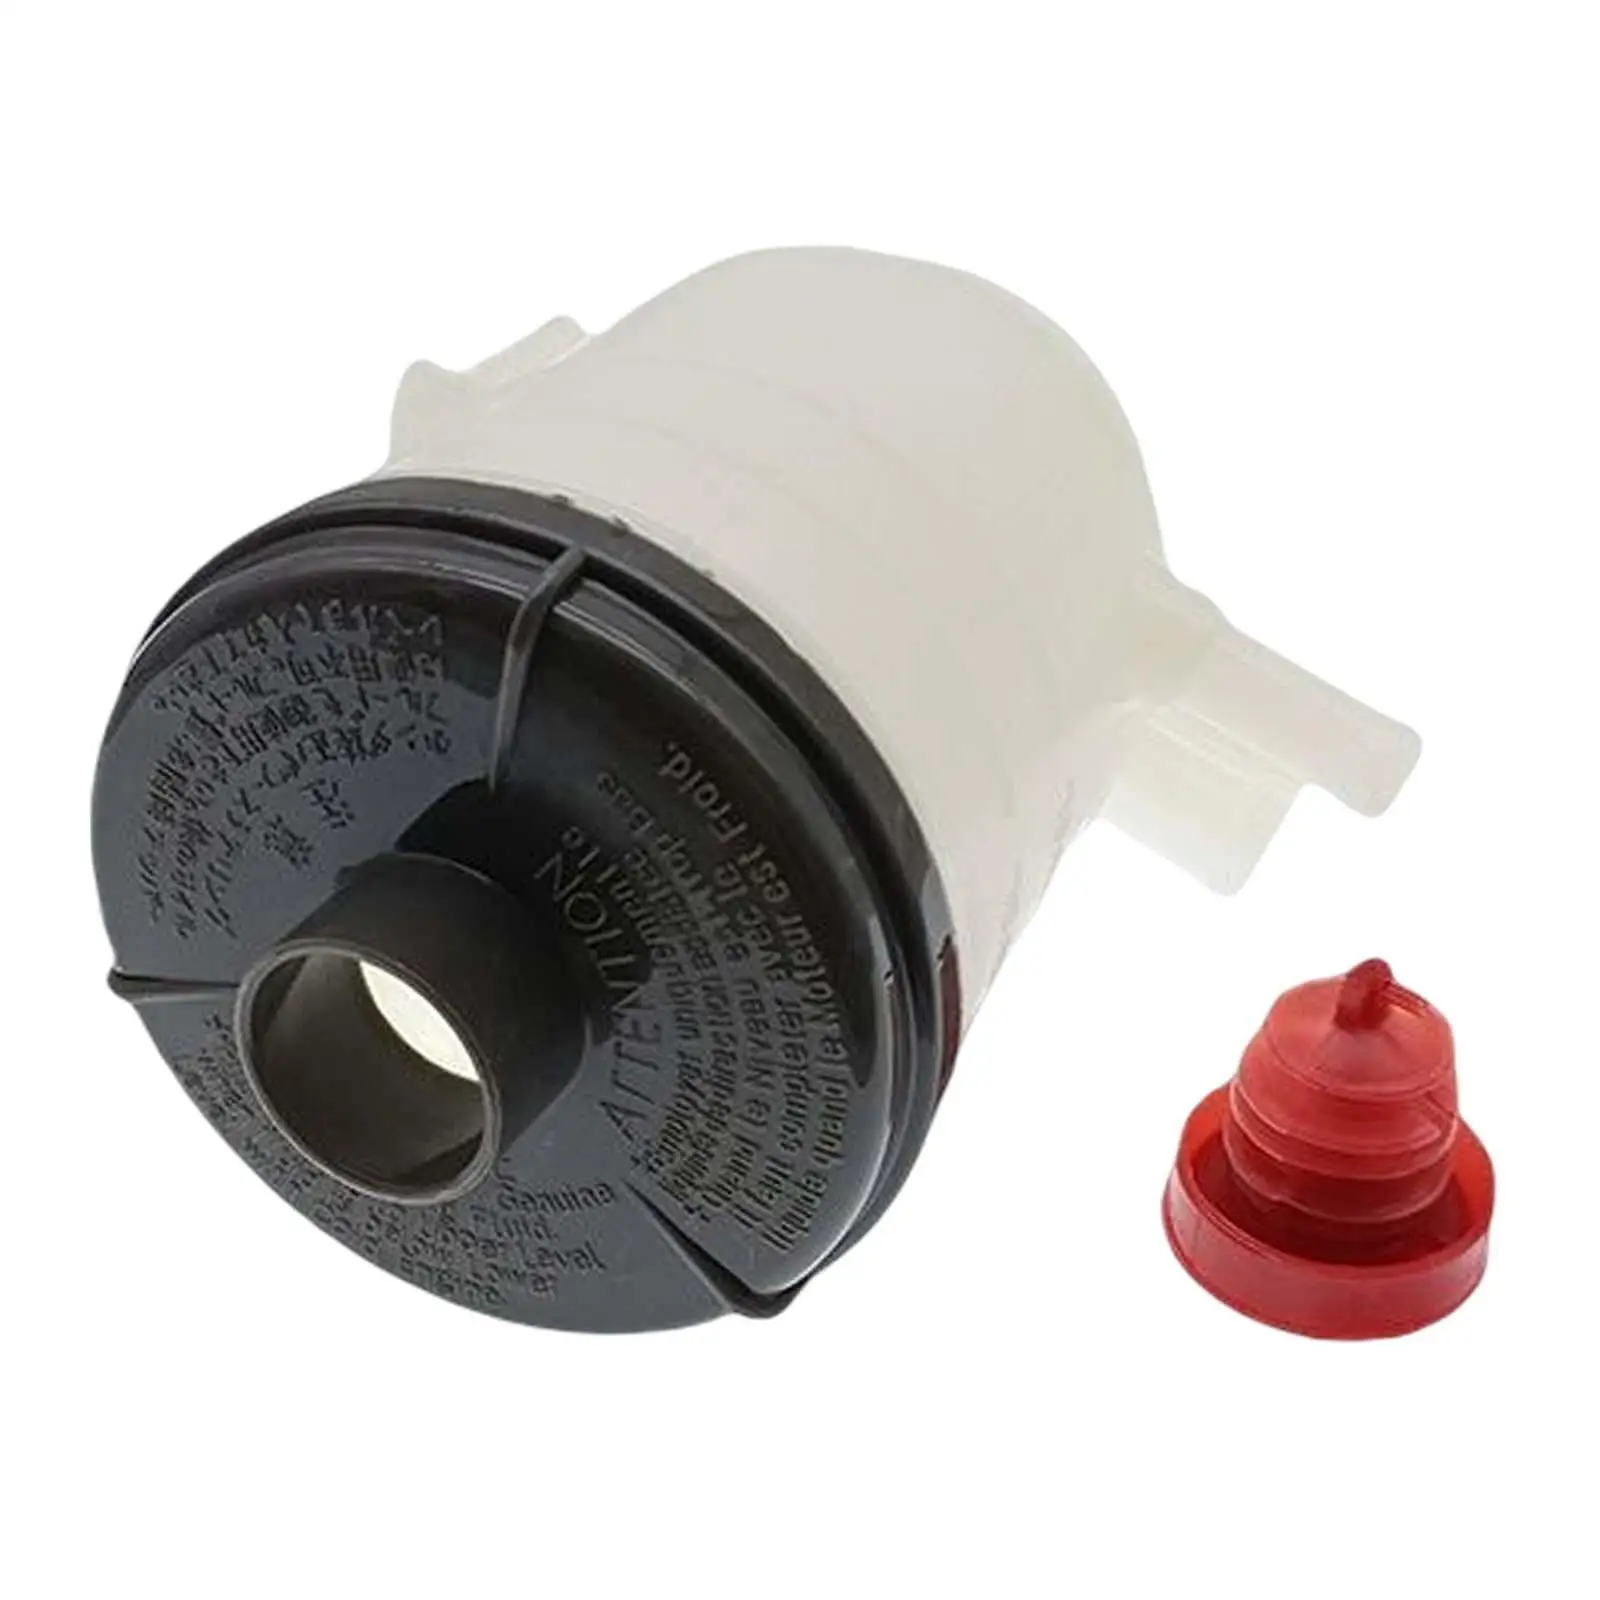 

Power Steering Pump Reservoir Professional Accessories Replacement Parts Booster Pump Oil Cup for Honda Accord 98-02